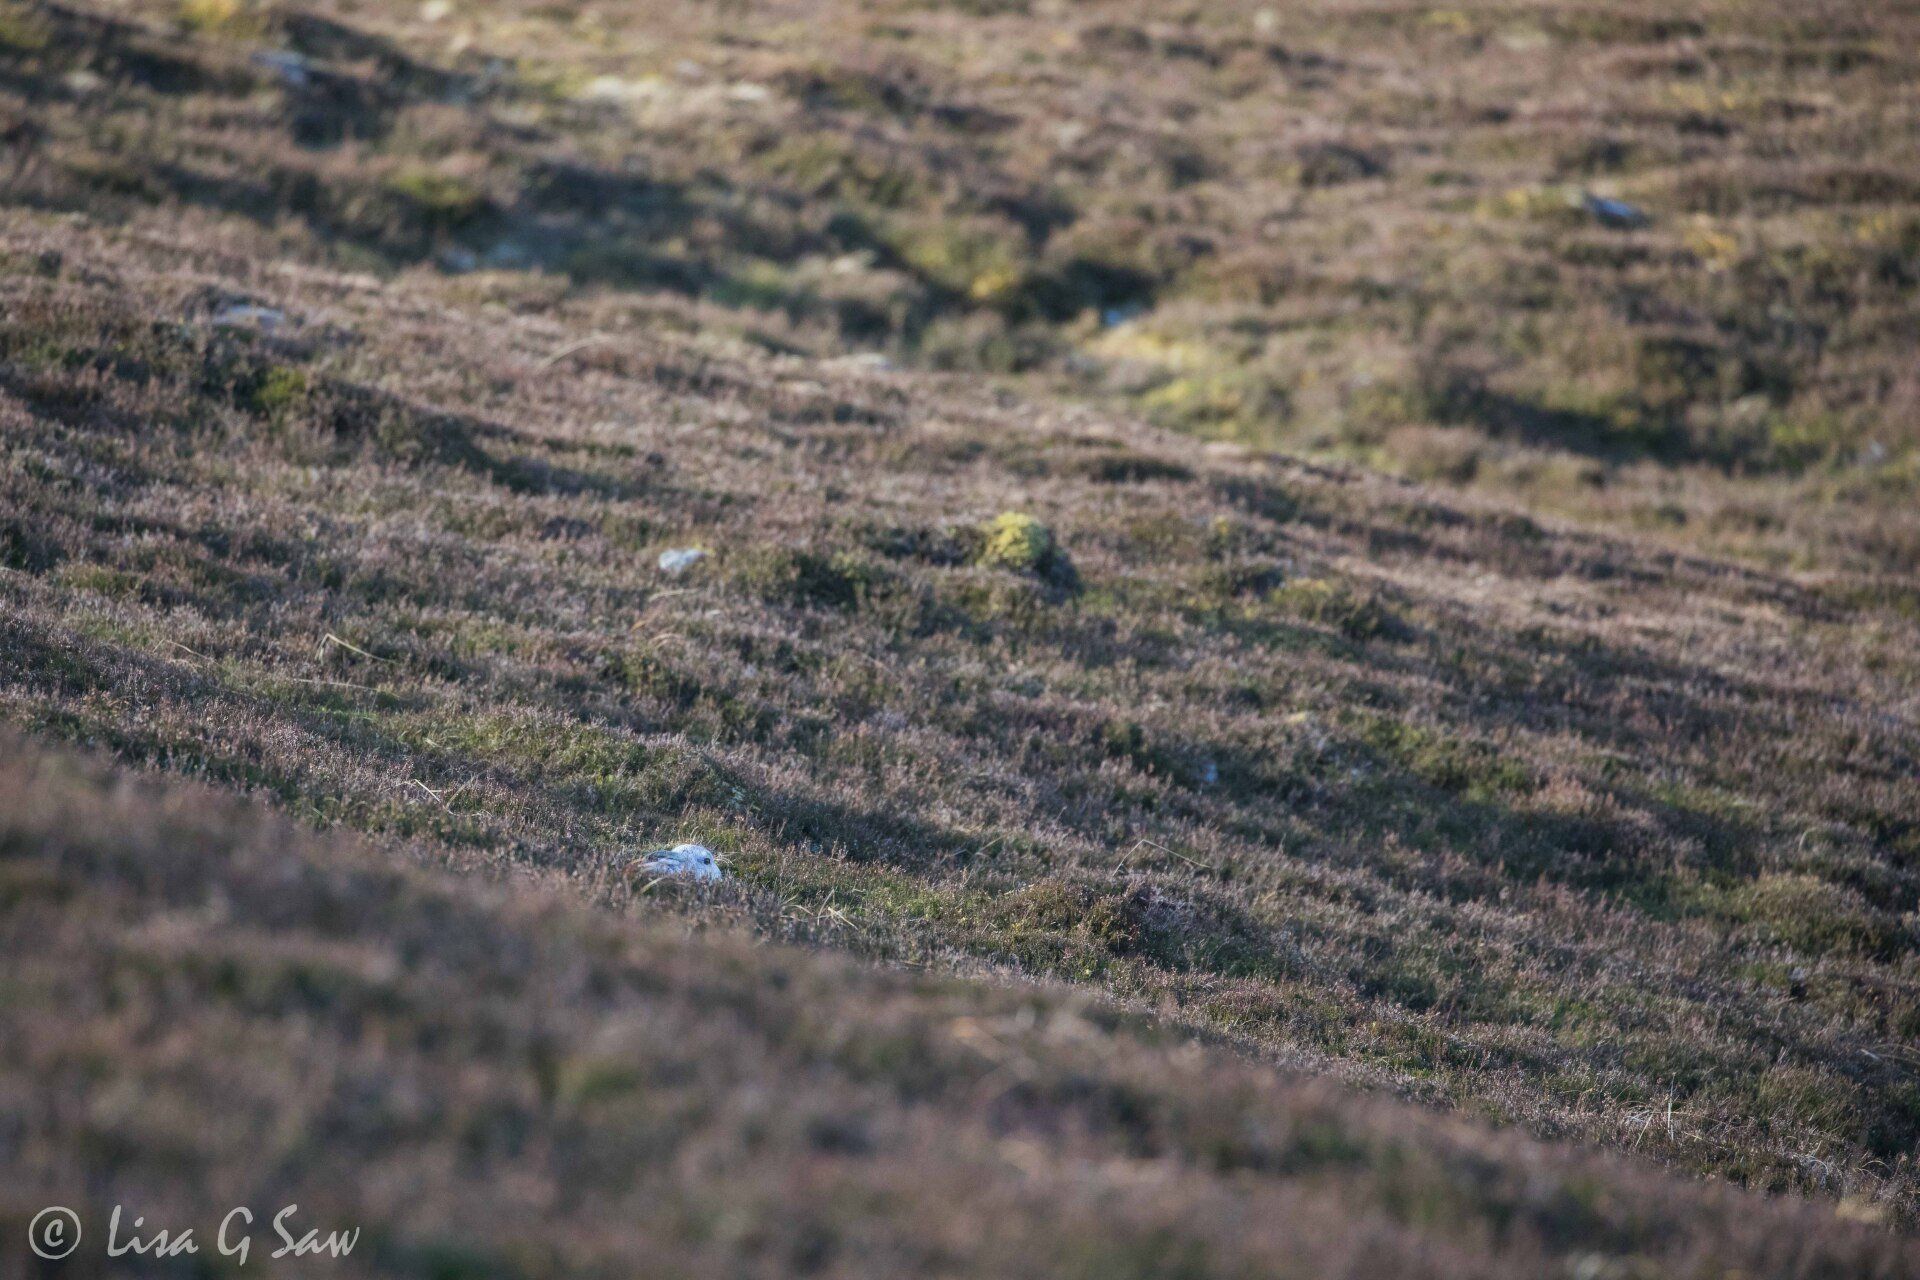 White Mountain Hare in winter pelage hiding in heather